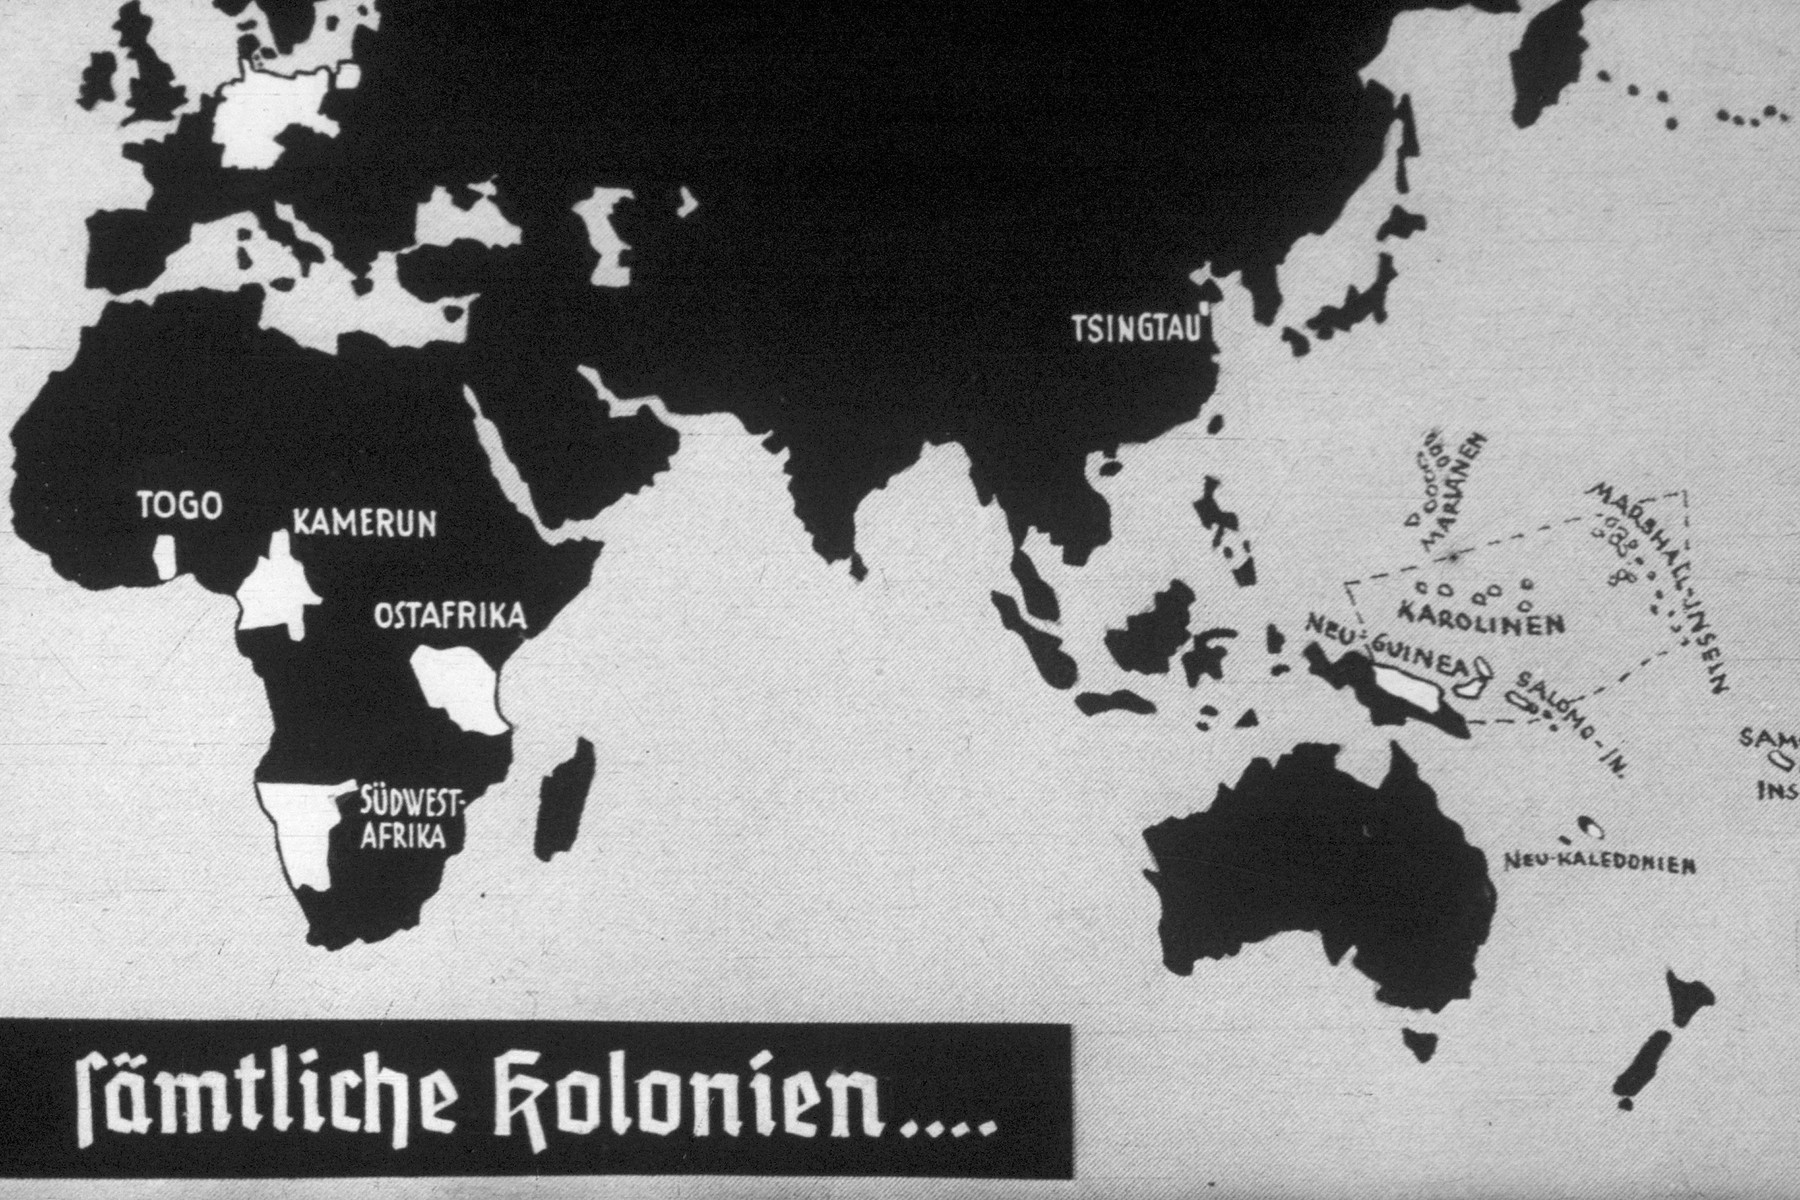 31th slide from a Hitler Youth slideshow about the aftermath of WWI, Versailles, how it was overcome and the rise of Nazism.

sämtliche kolonien...
//
all the colonies